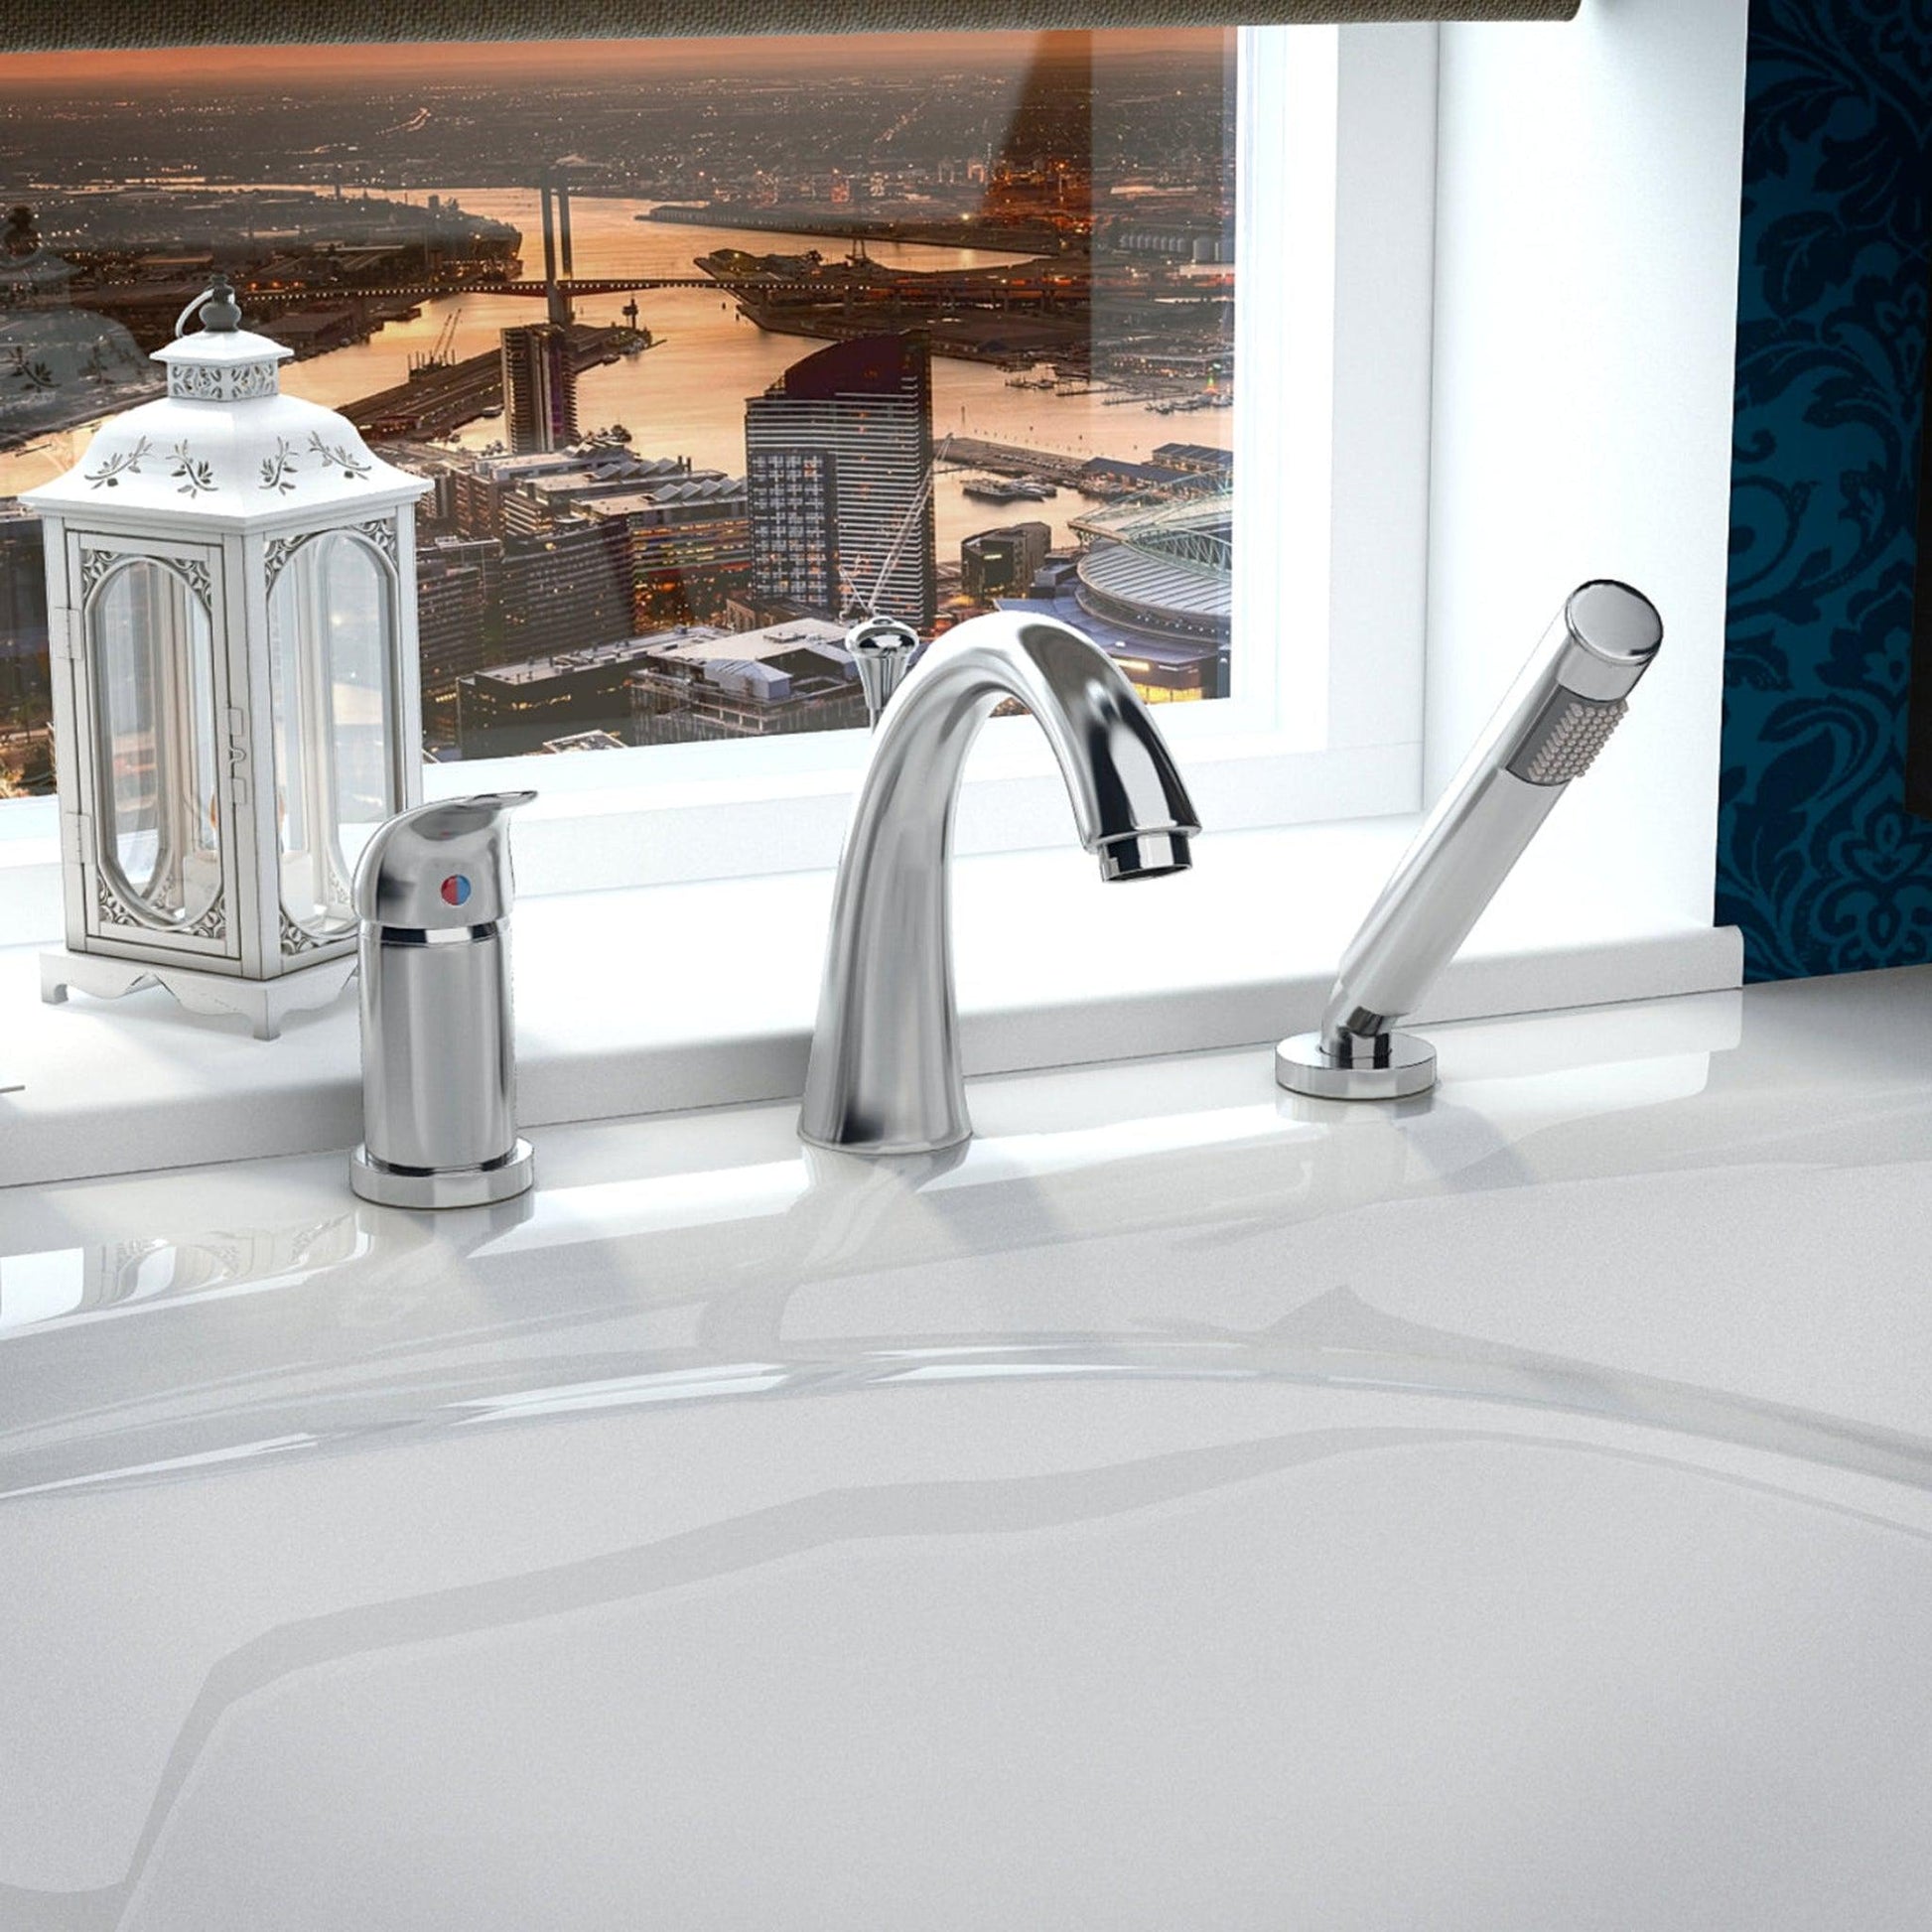 ANZZI Den Series Single Handle Polished Chrome Roman Tub Faucet With Euro-Grip Handheld Sprayer